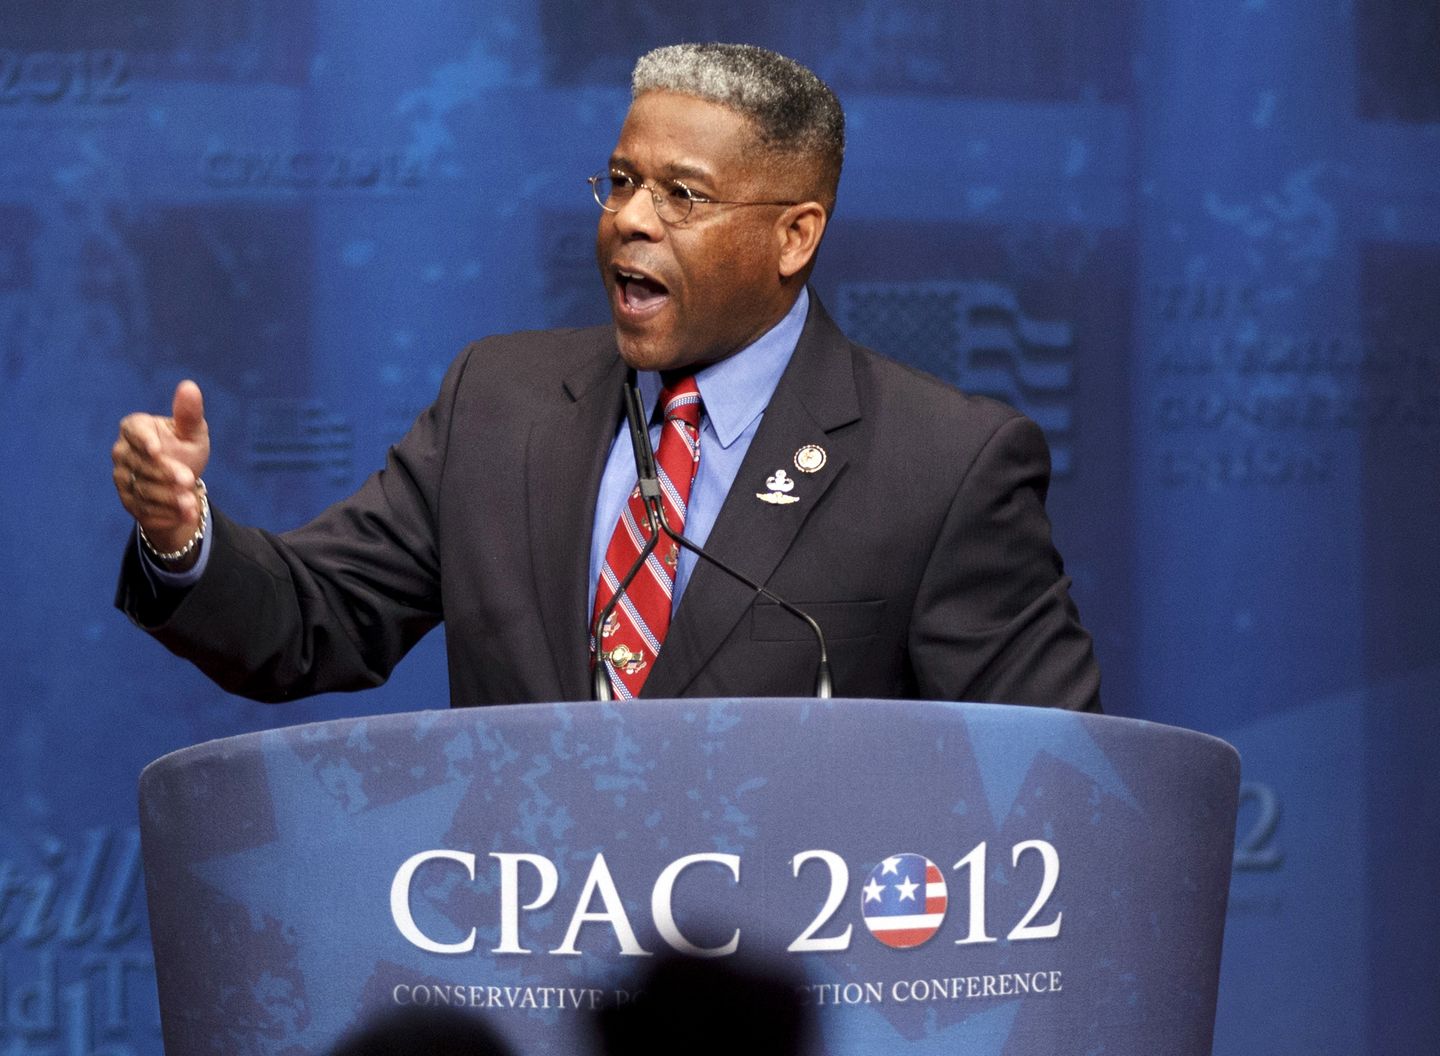 Allen West launches bid to replace NRAs Wayne LaPierre, ignites bitter feud within gun group